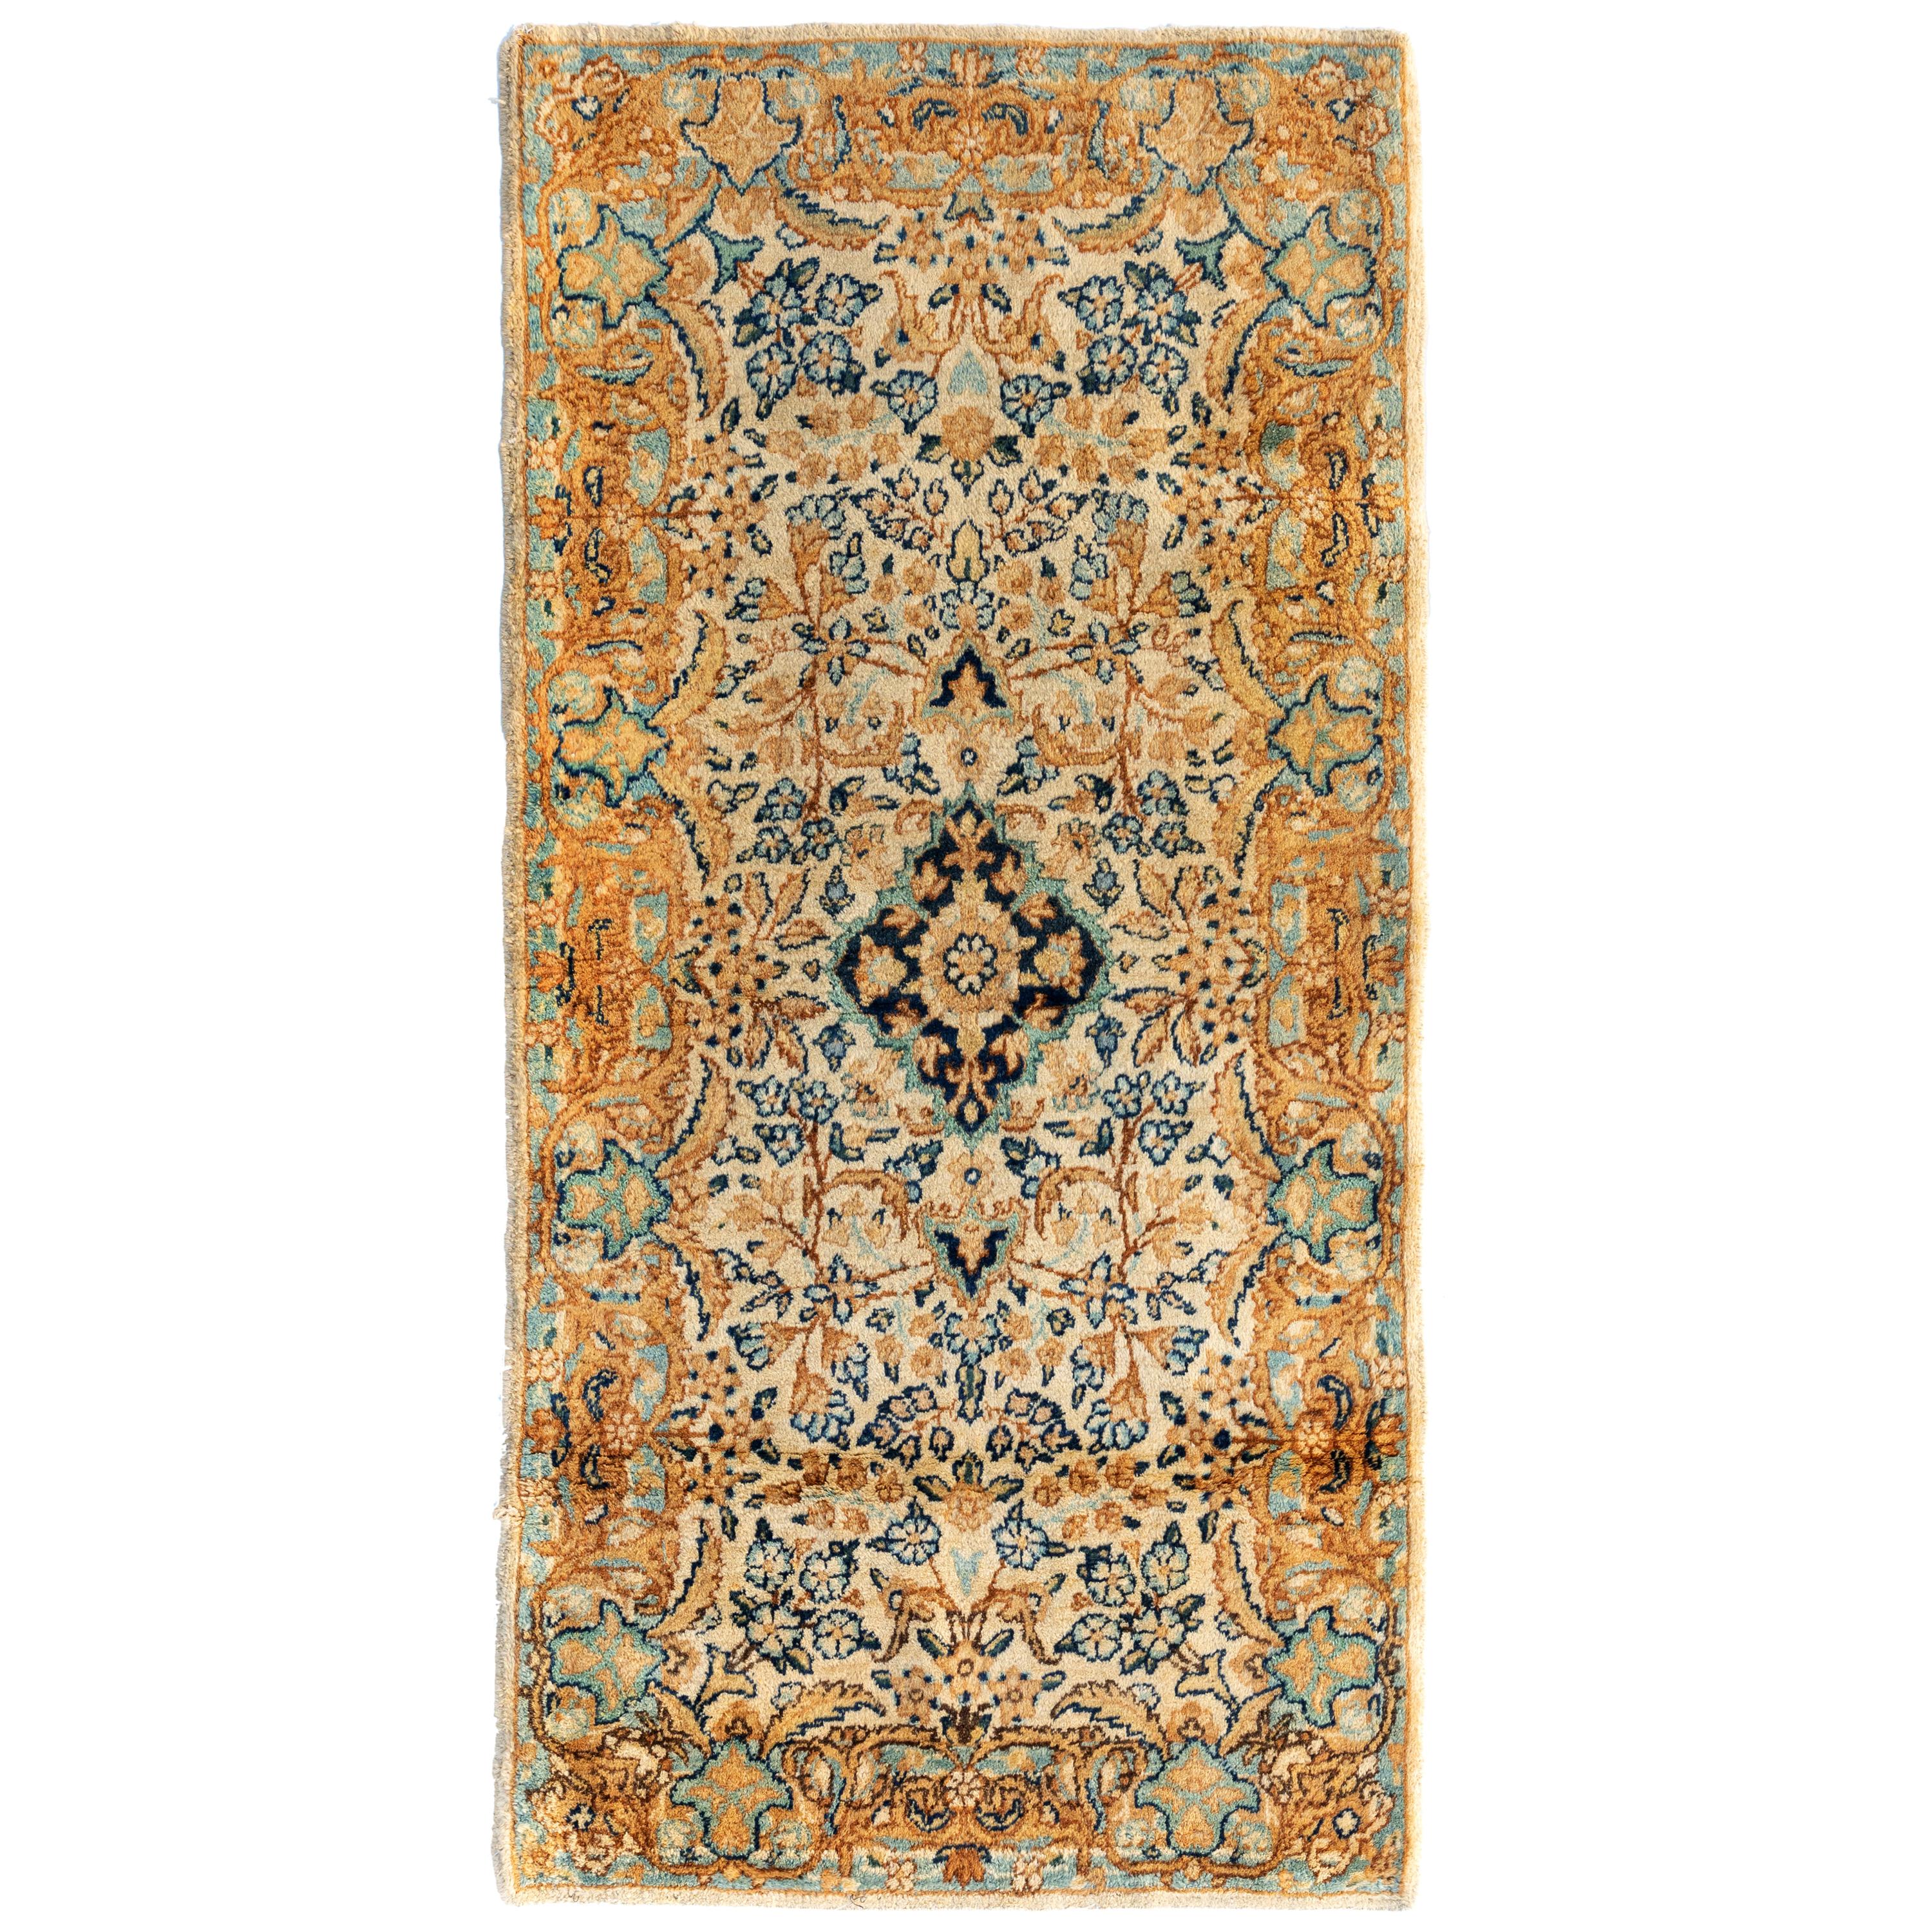 Antique Vintage Persian Ivory Gold Blue Floral Kirman Small Rug, circa 1930s For Sale